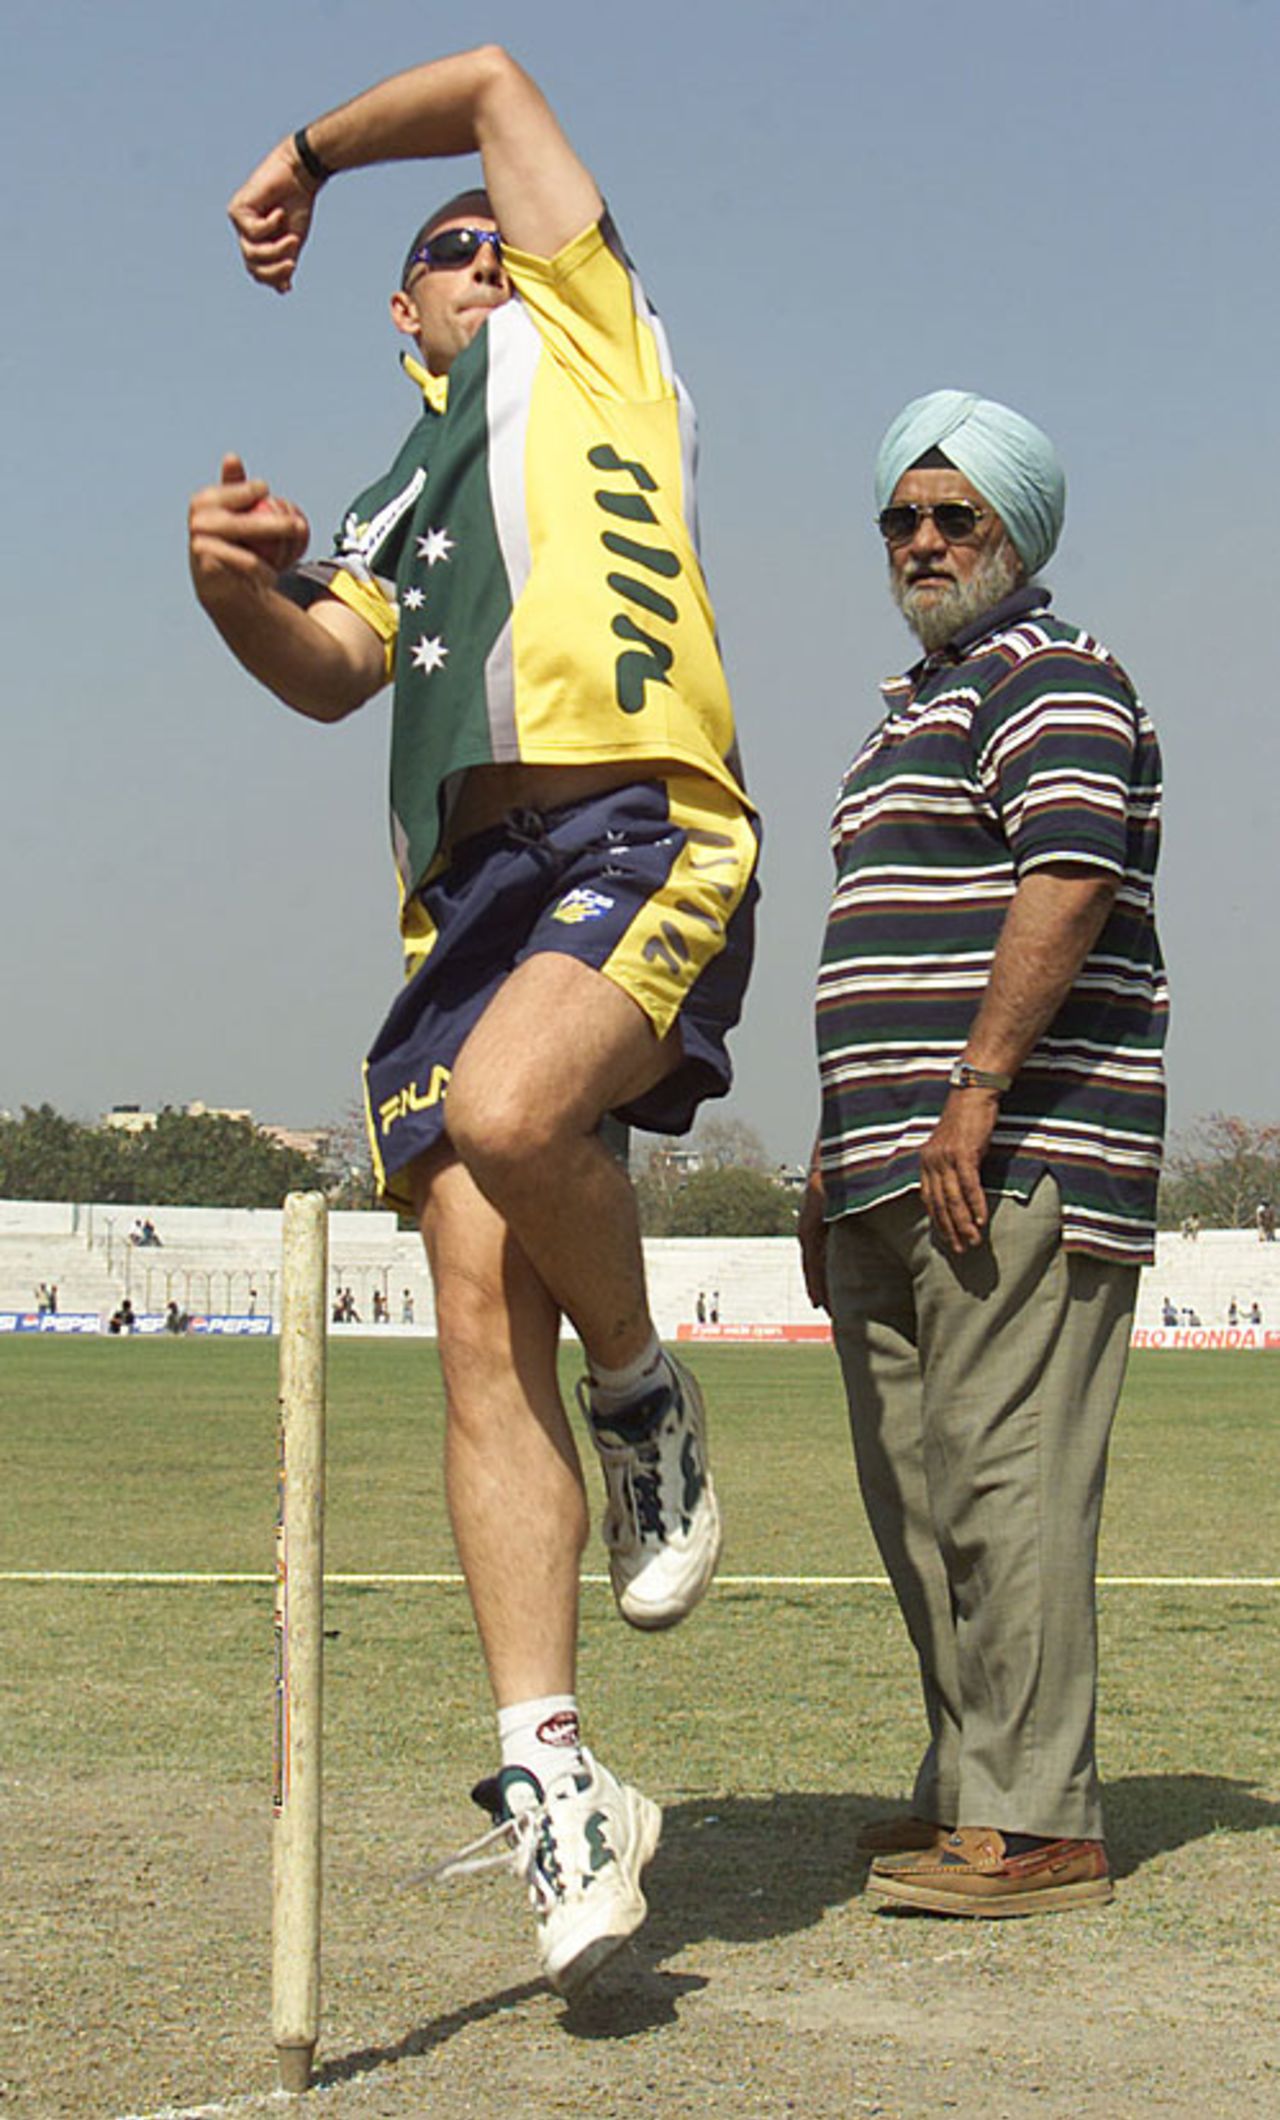 Bishan Bedi watched Colin Miller bowl during practice, March 8, 2001